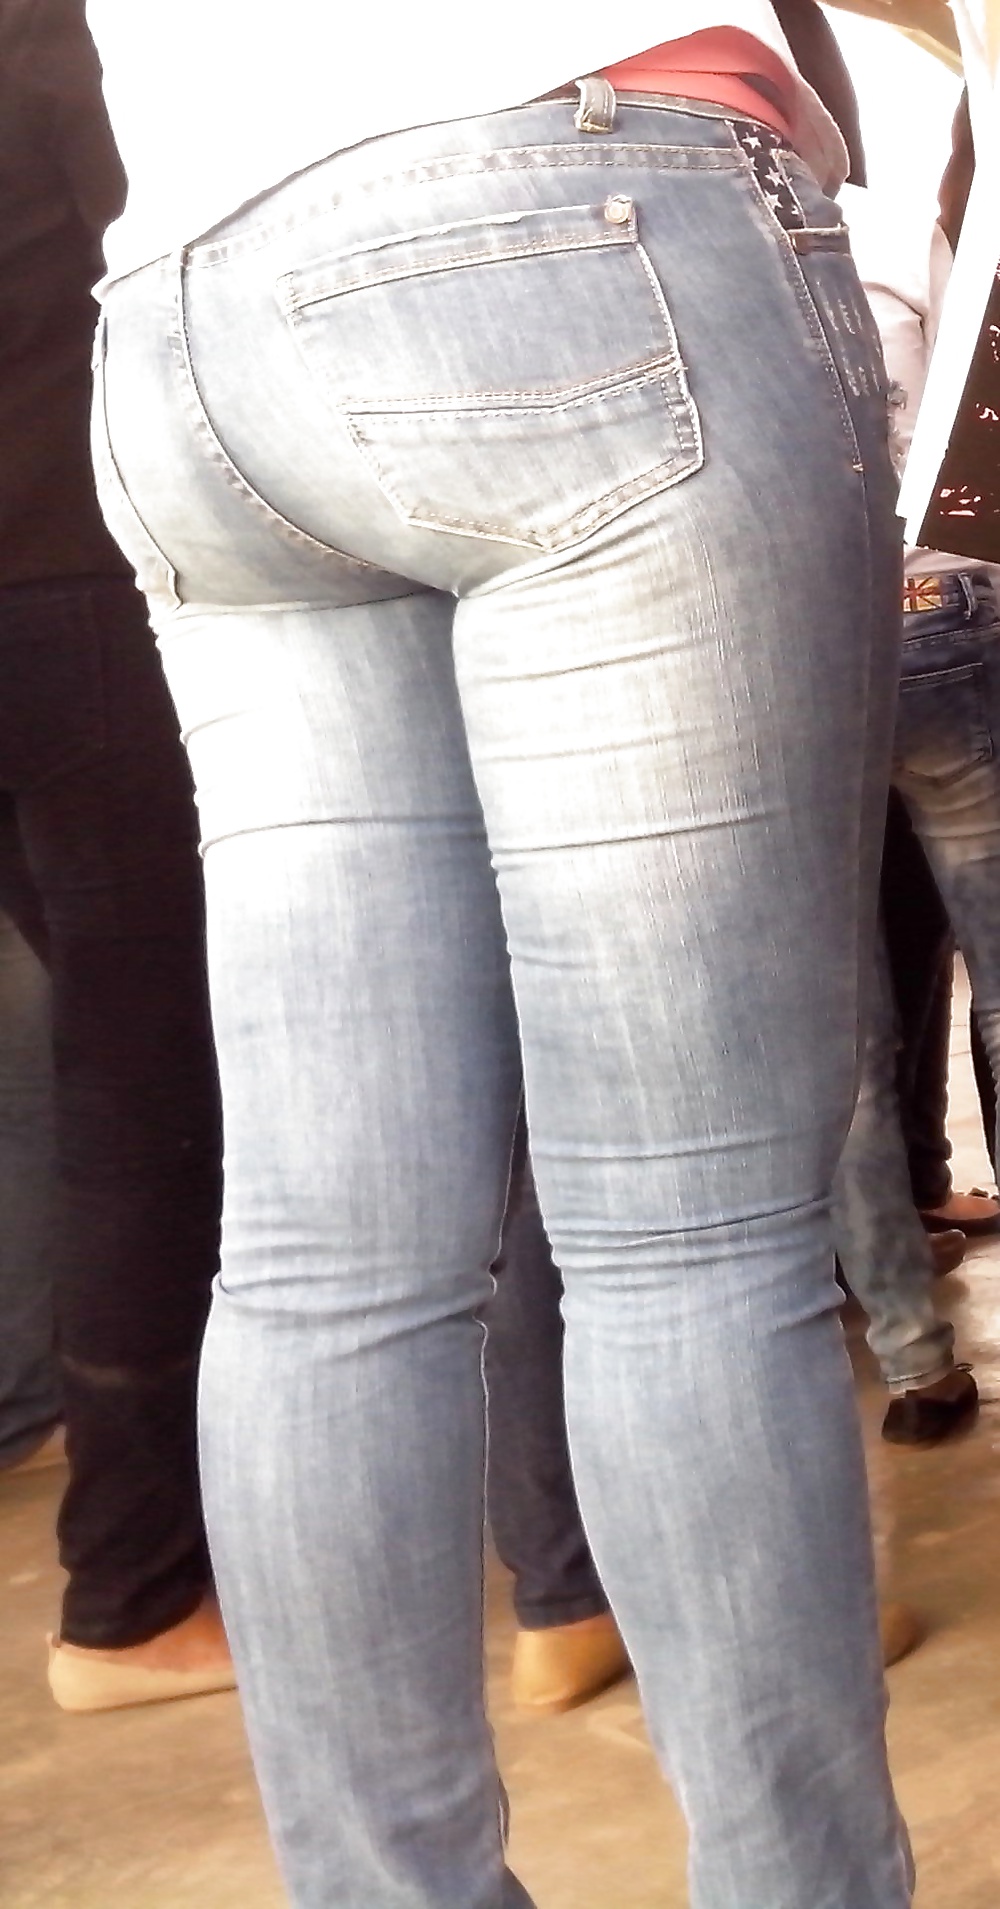 Tight jeans #12488146